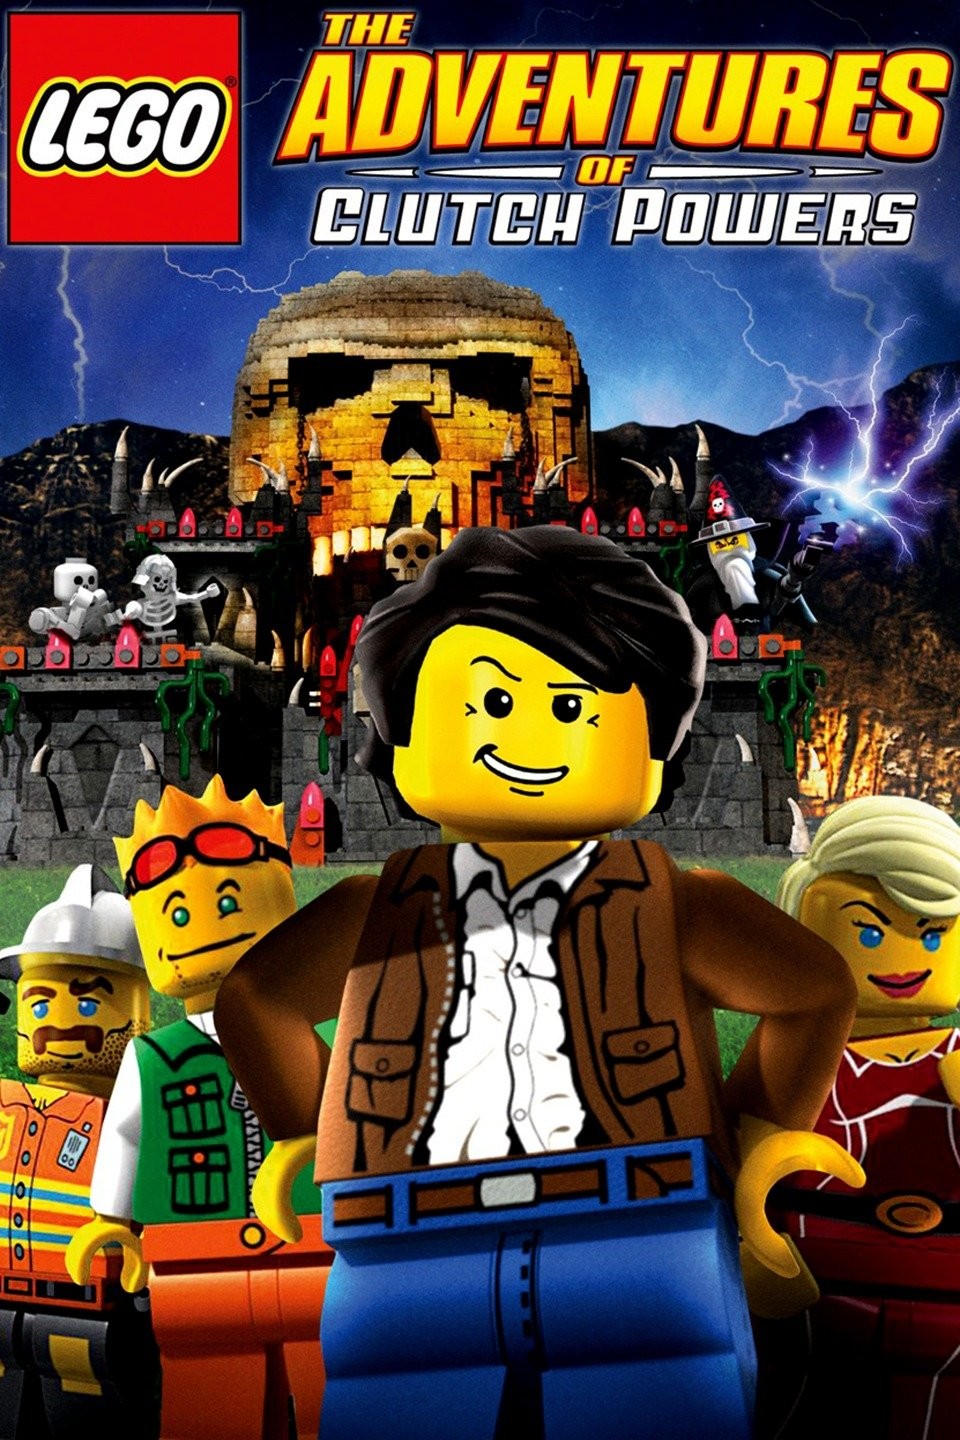 LEGO: The Adventures of Clutch Powers 